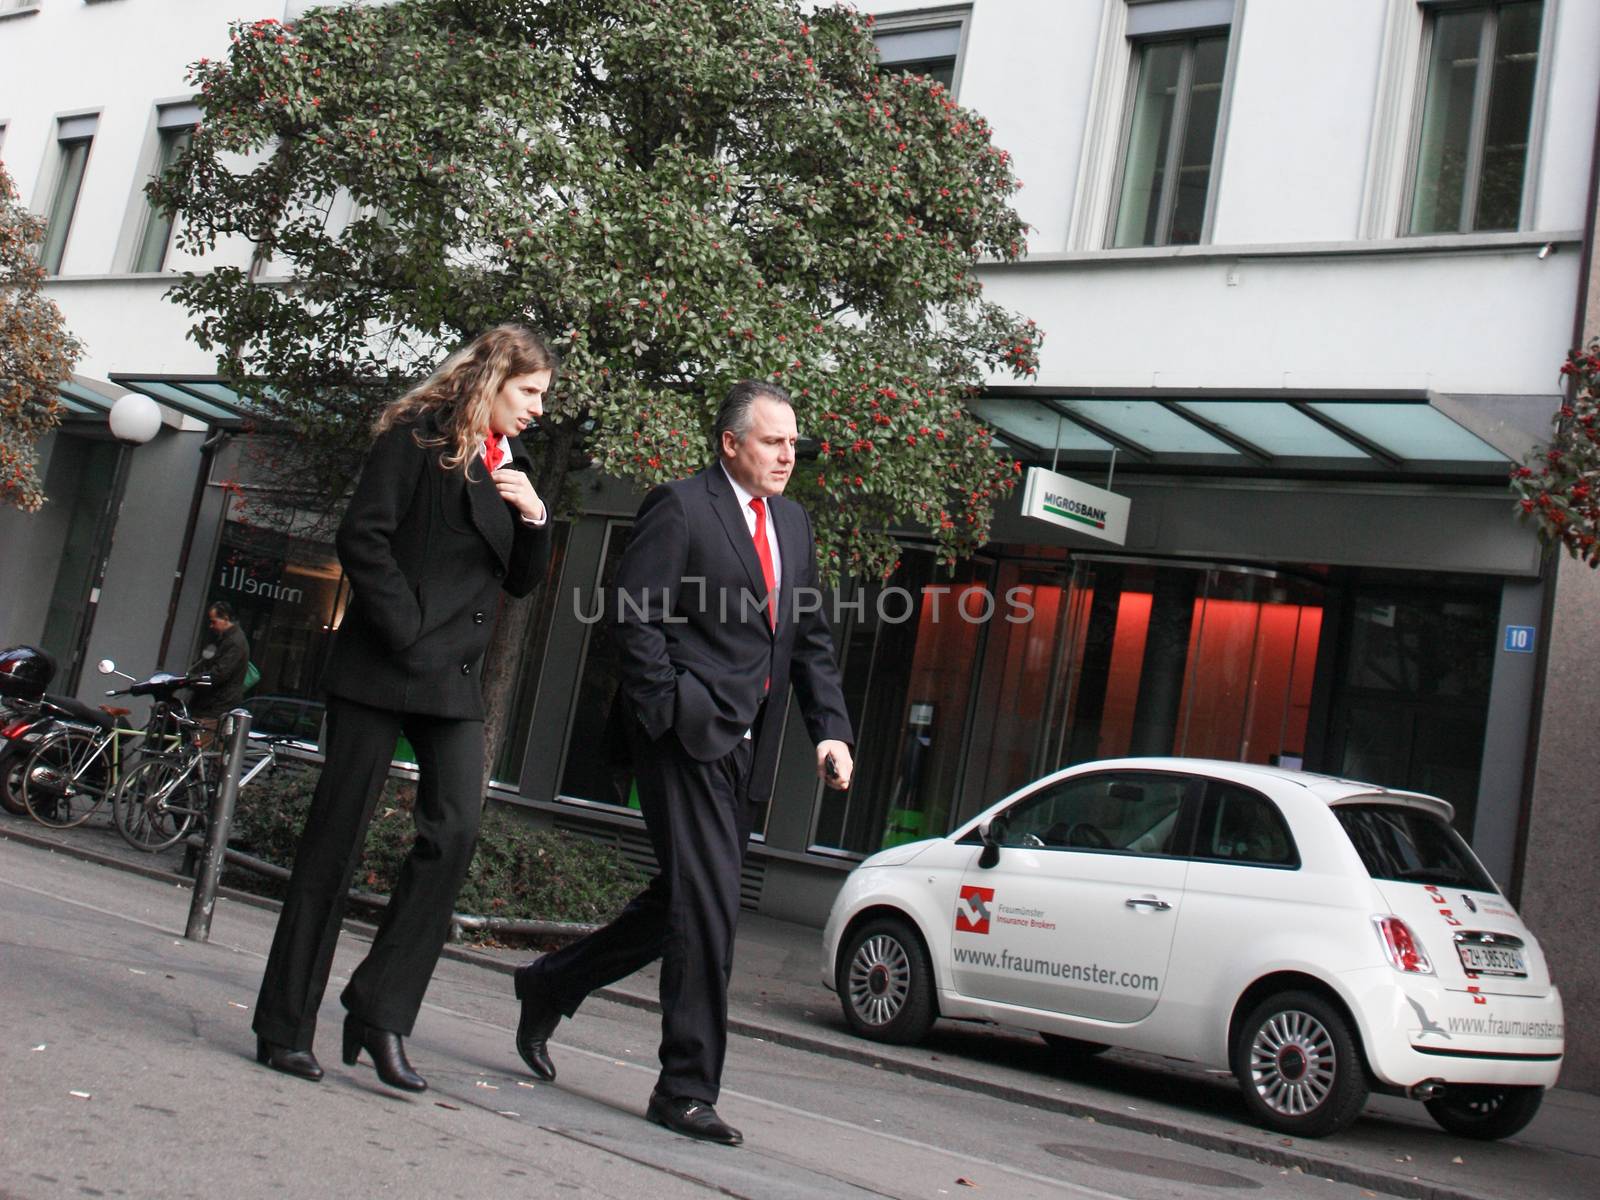 Zurich, Switzerland - November 27, 2011.  Business man and woman in expensive suits striding down the street.